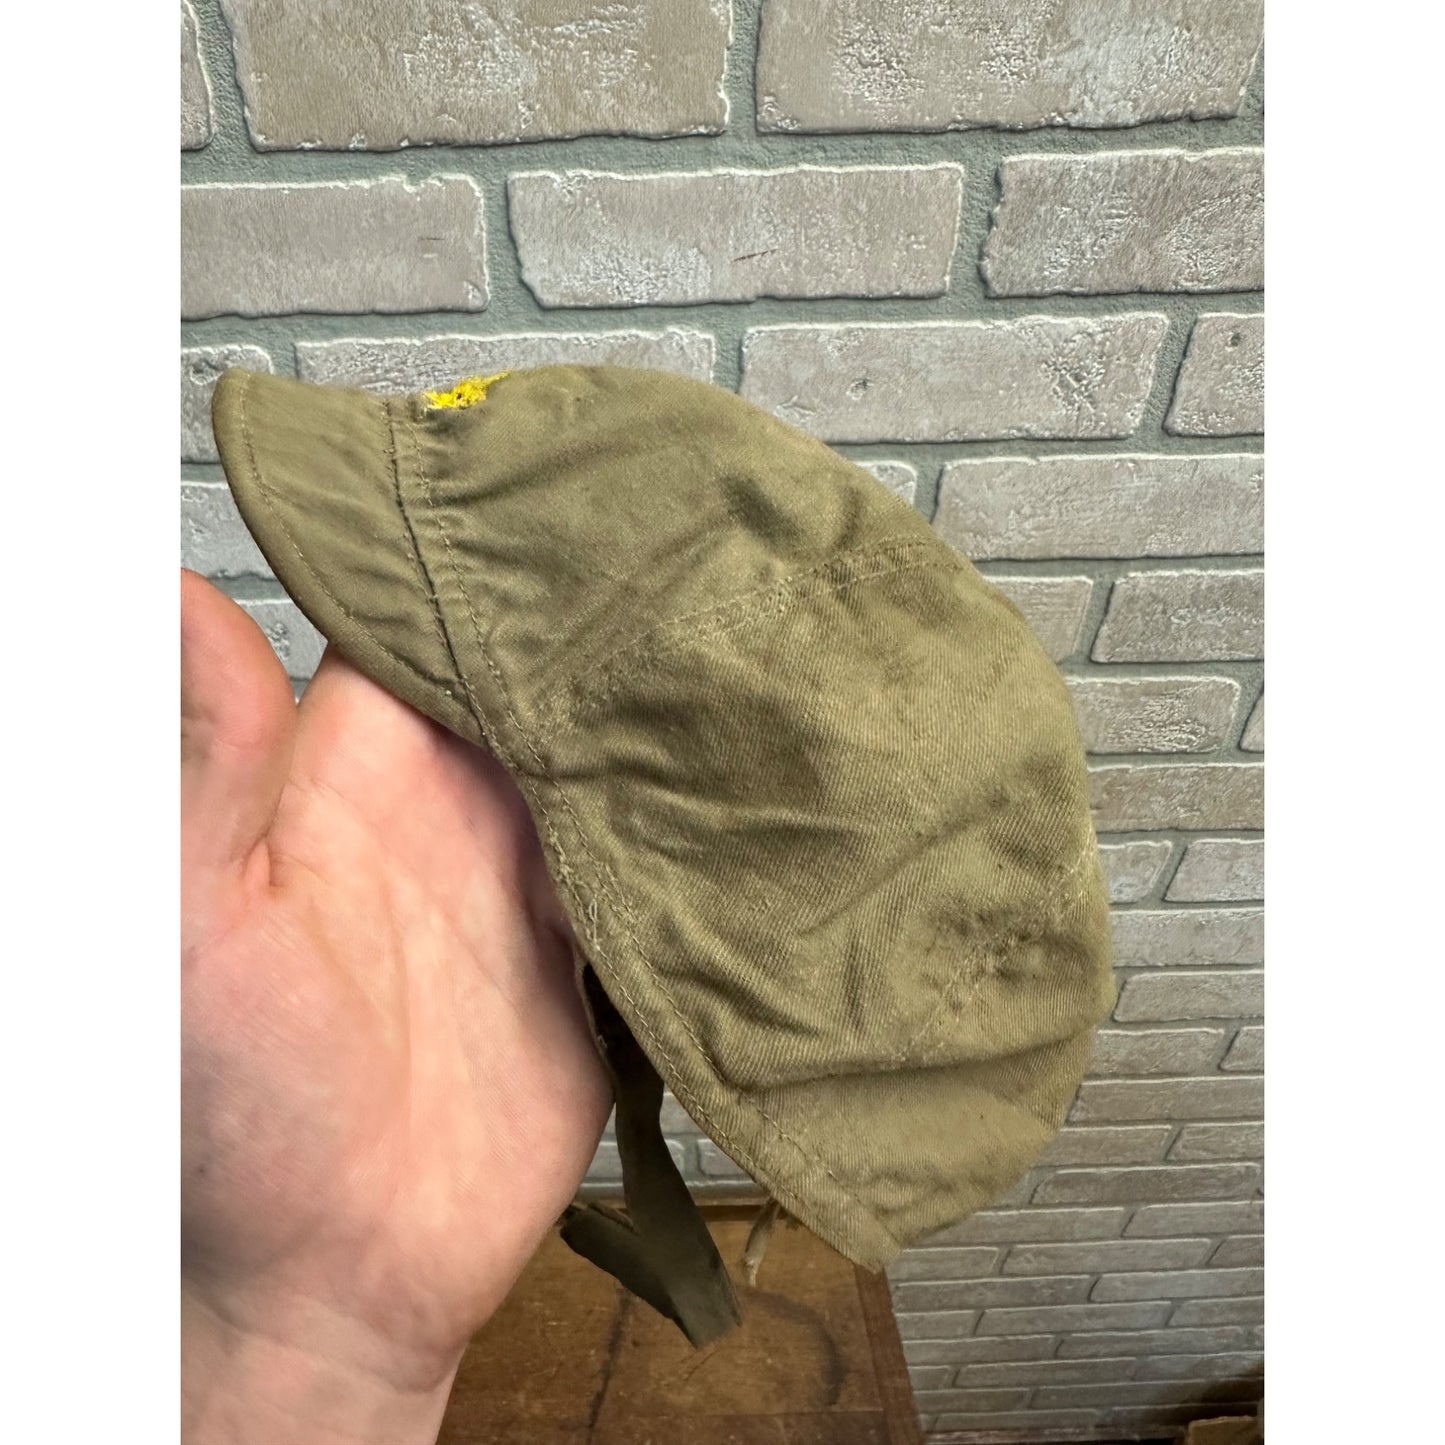 Vintage Child's Olive Drab Green Cap Hat w/ Stitched Star - Girl Scouts?